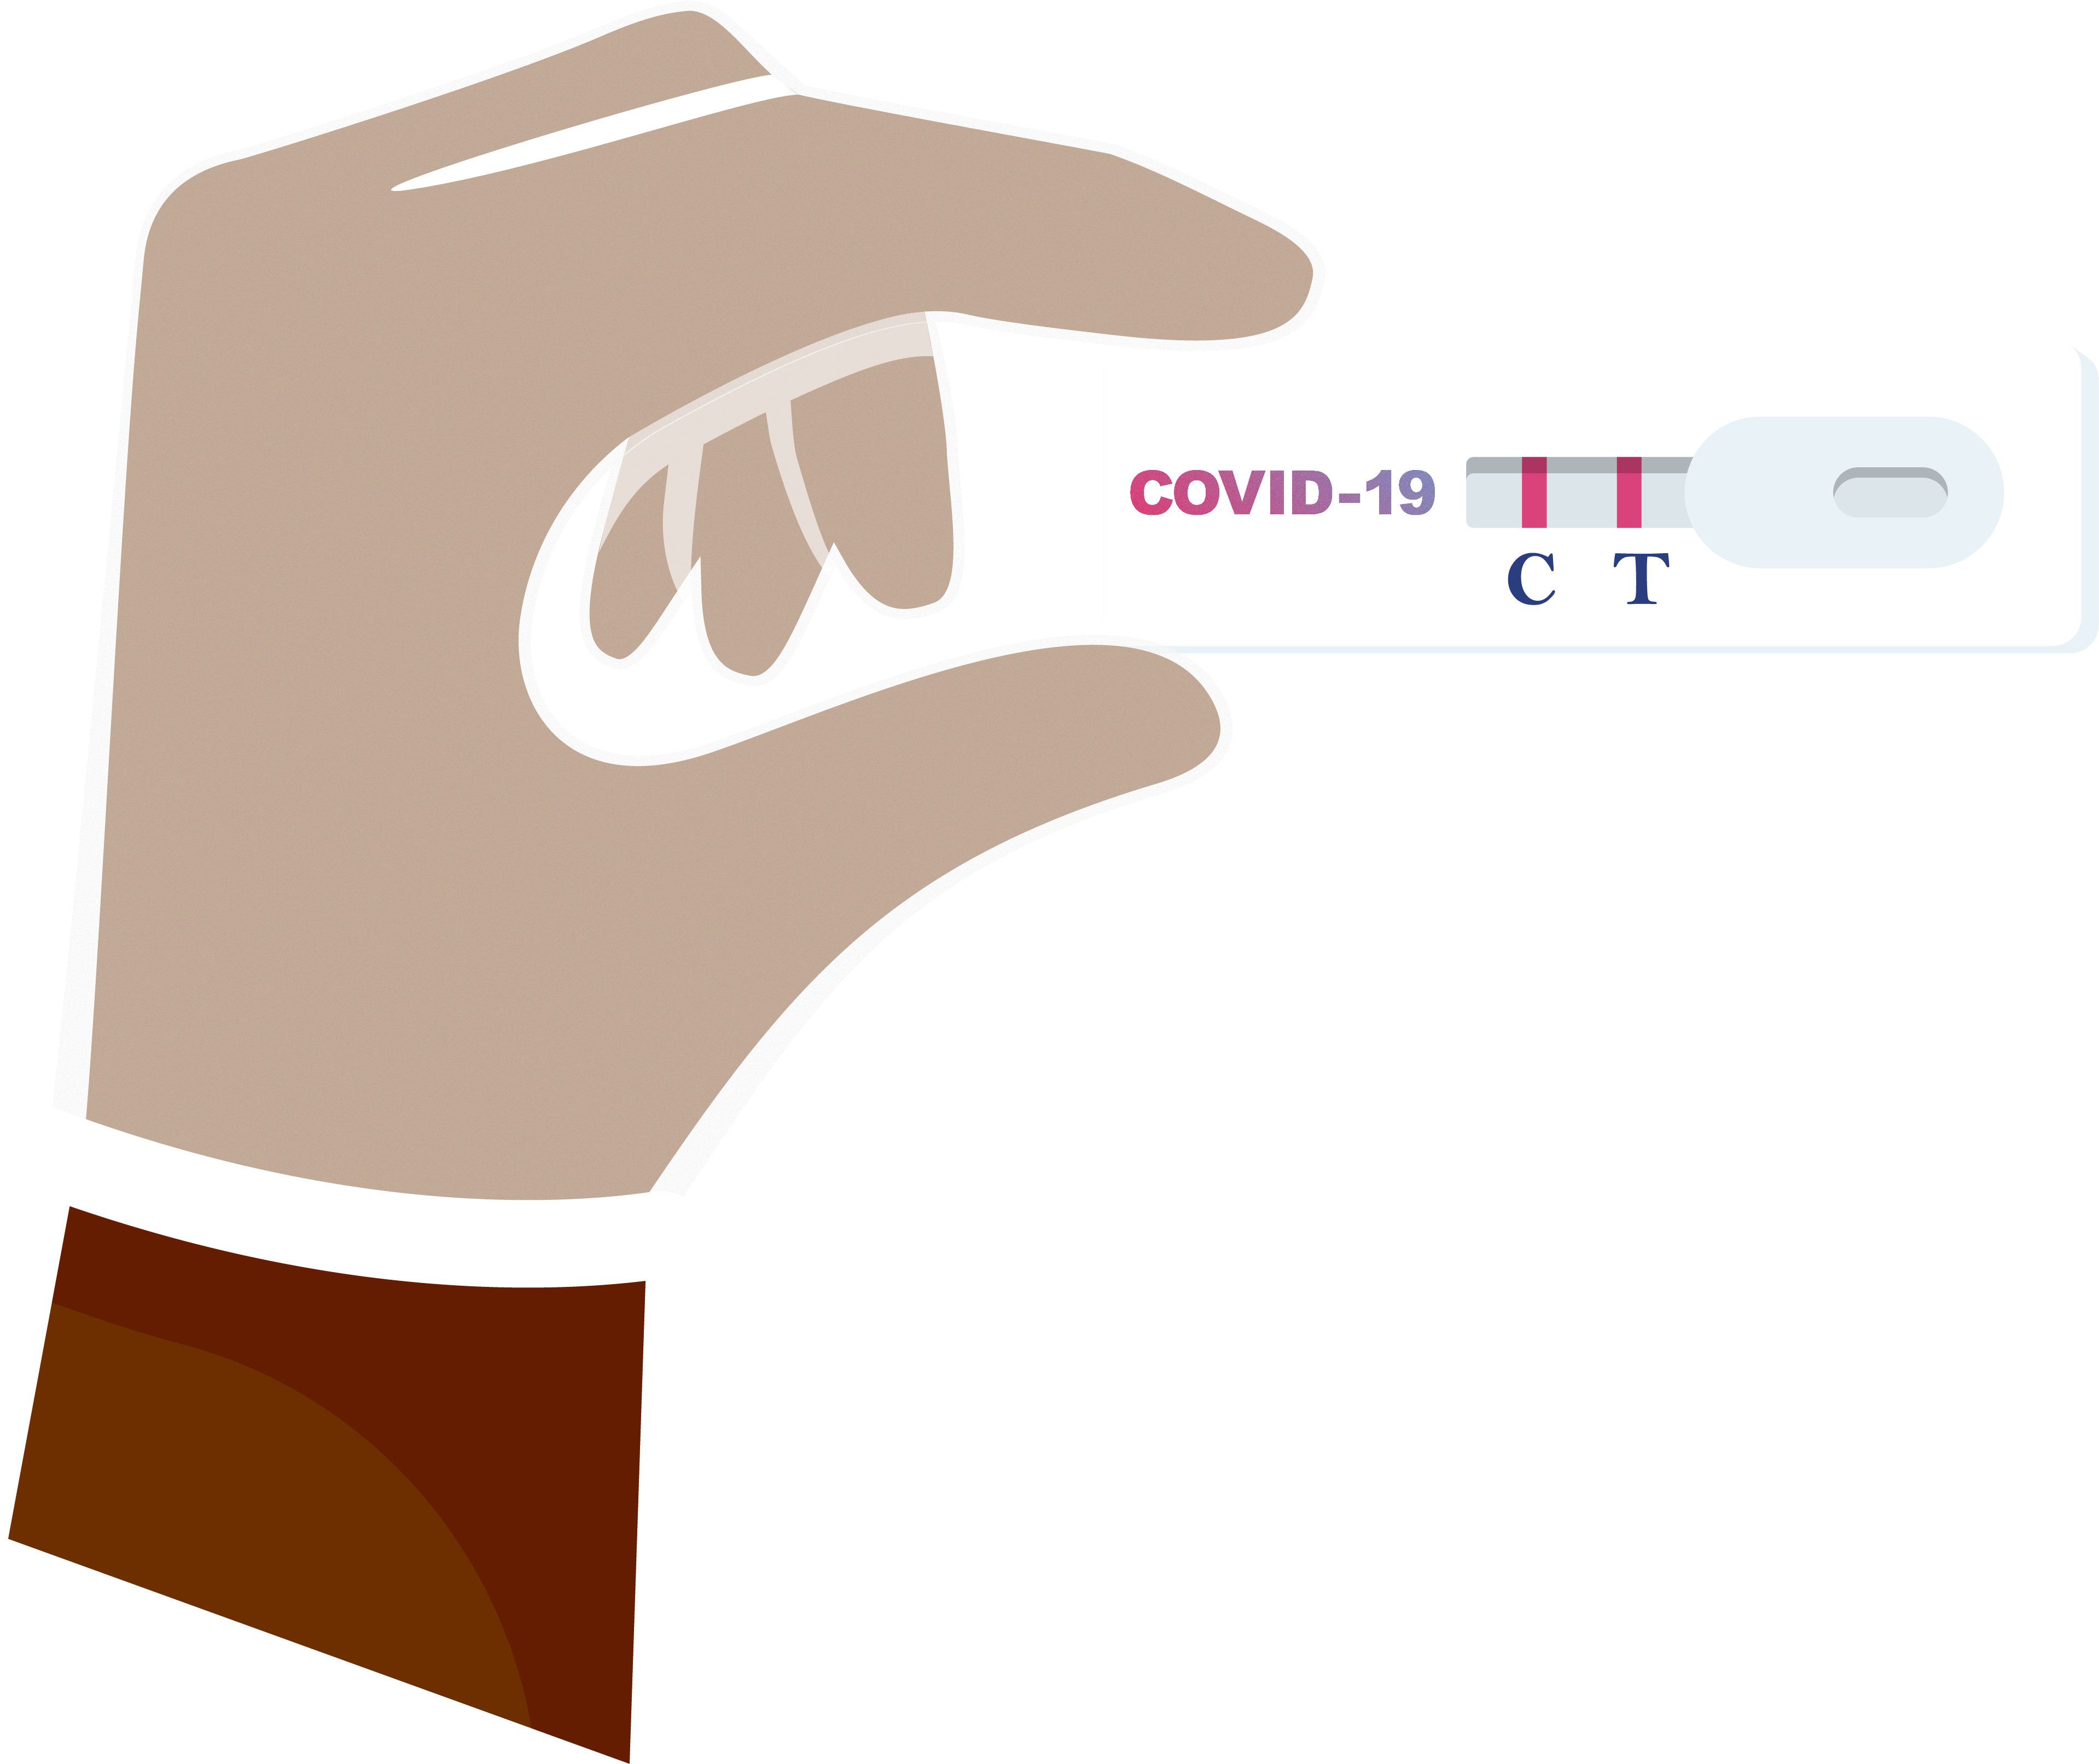 Illustration of a hand holding up a positive COVID-19 test